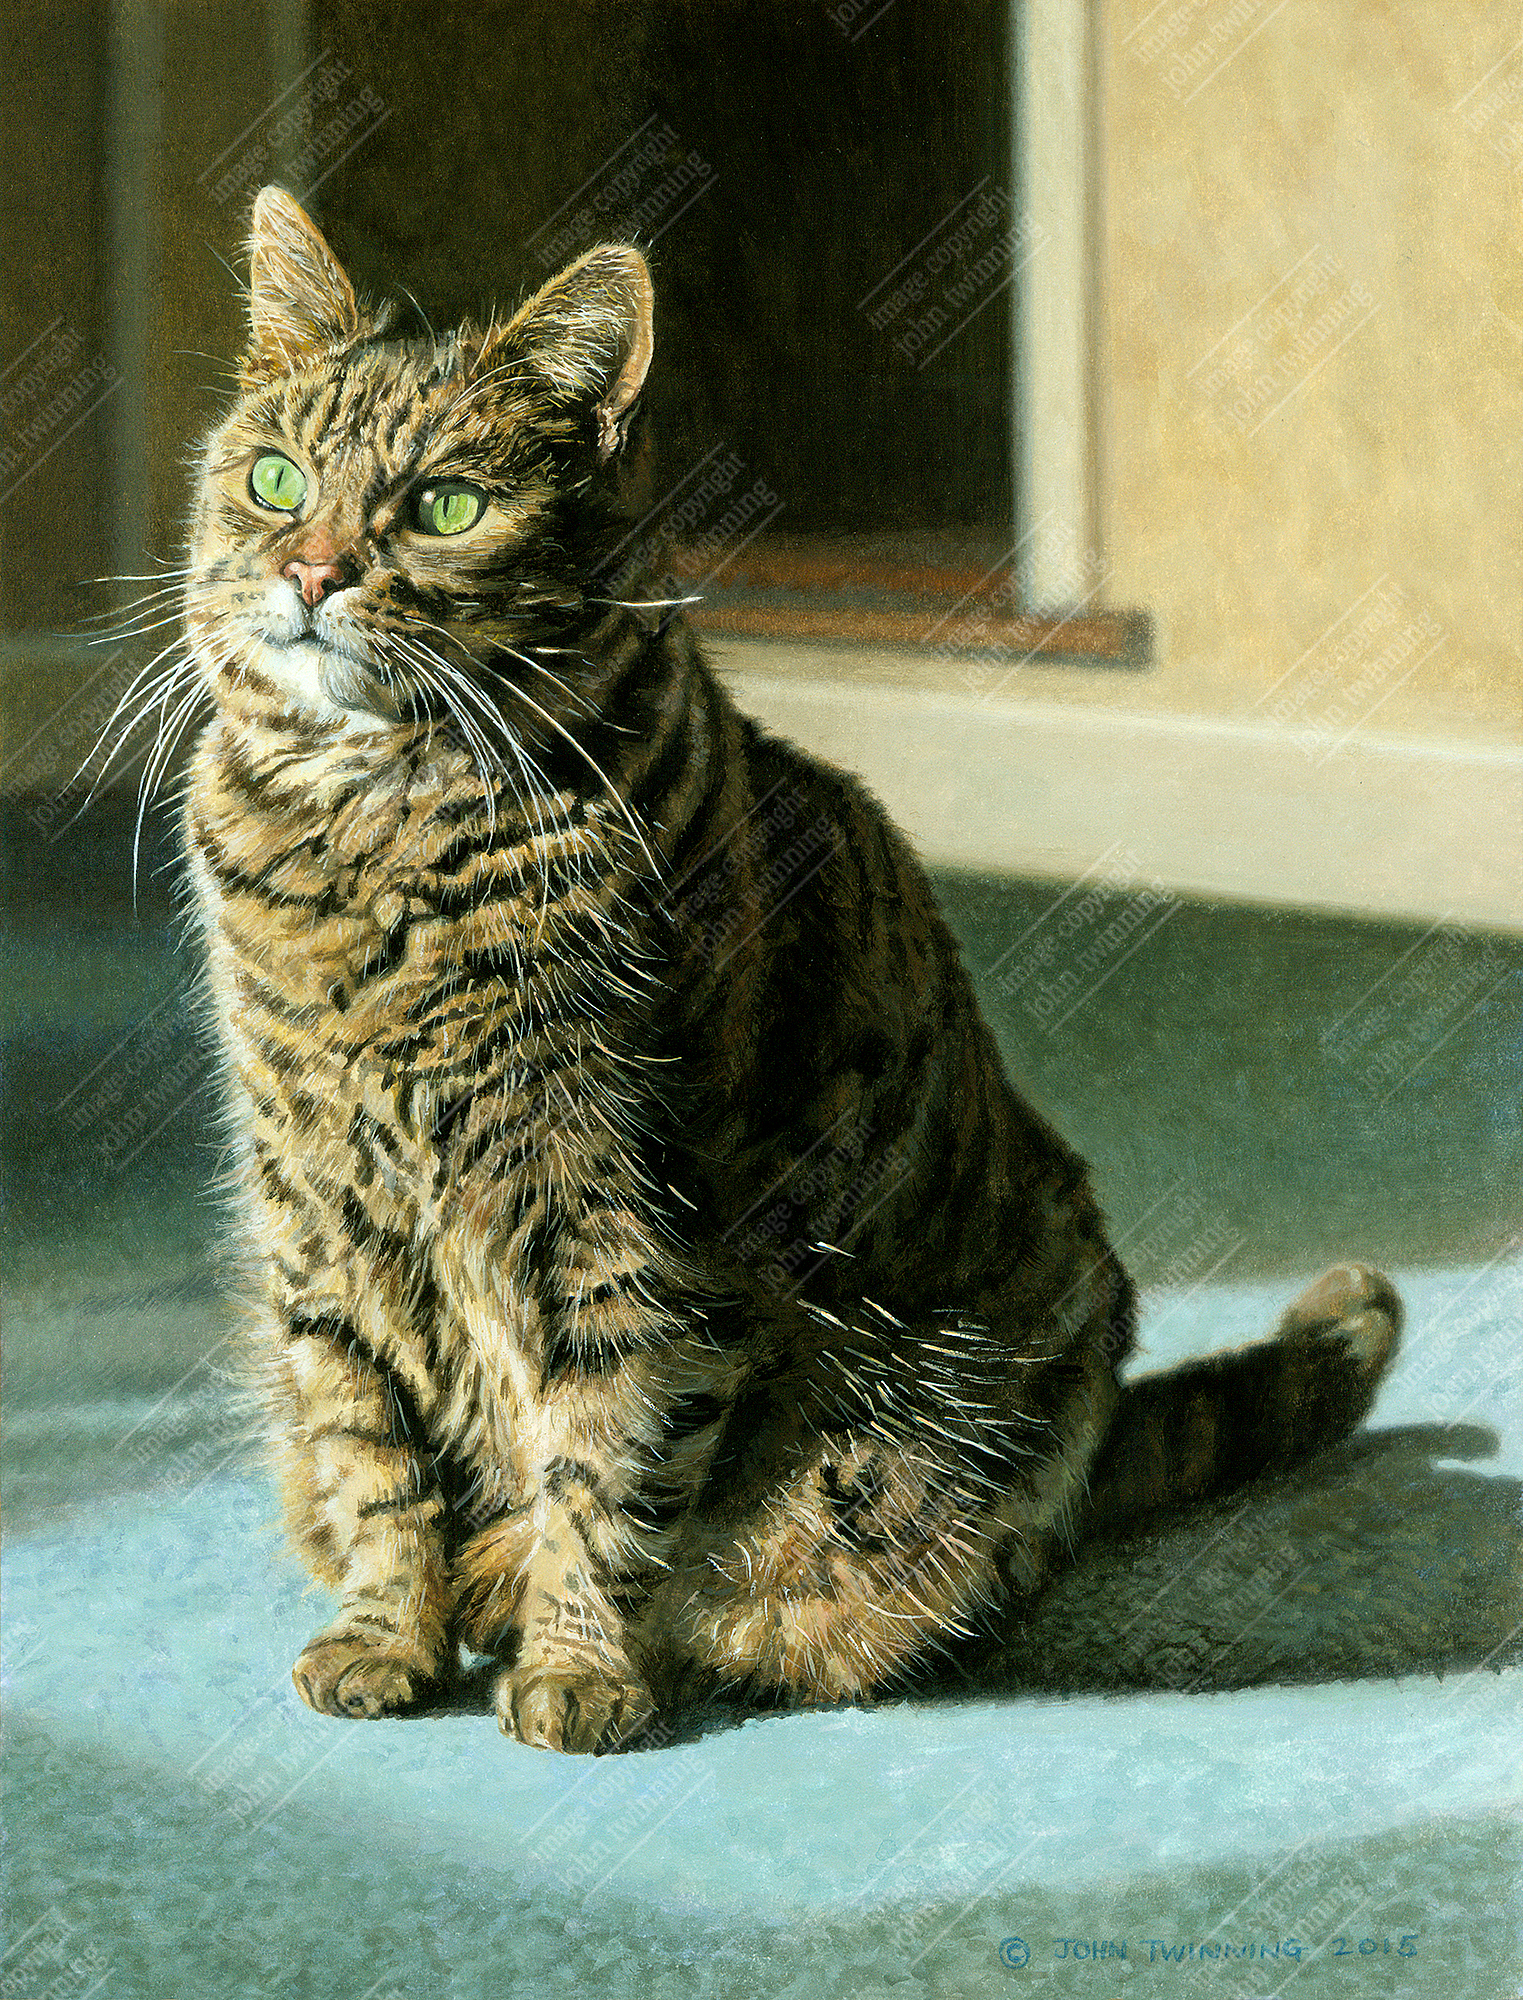 ‘Tabatha Study III’ – art print from a pet portrait watercolour painting of a tabby cat